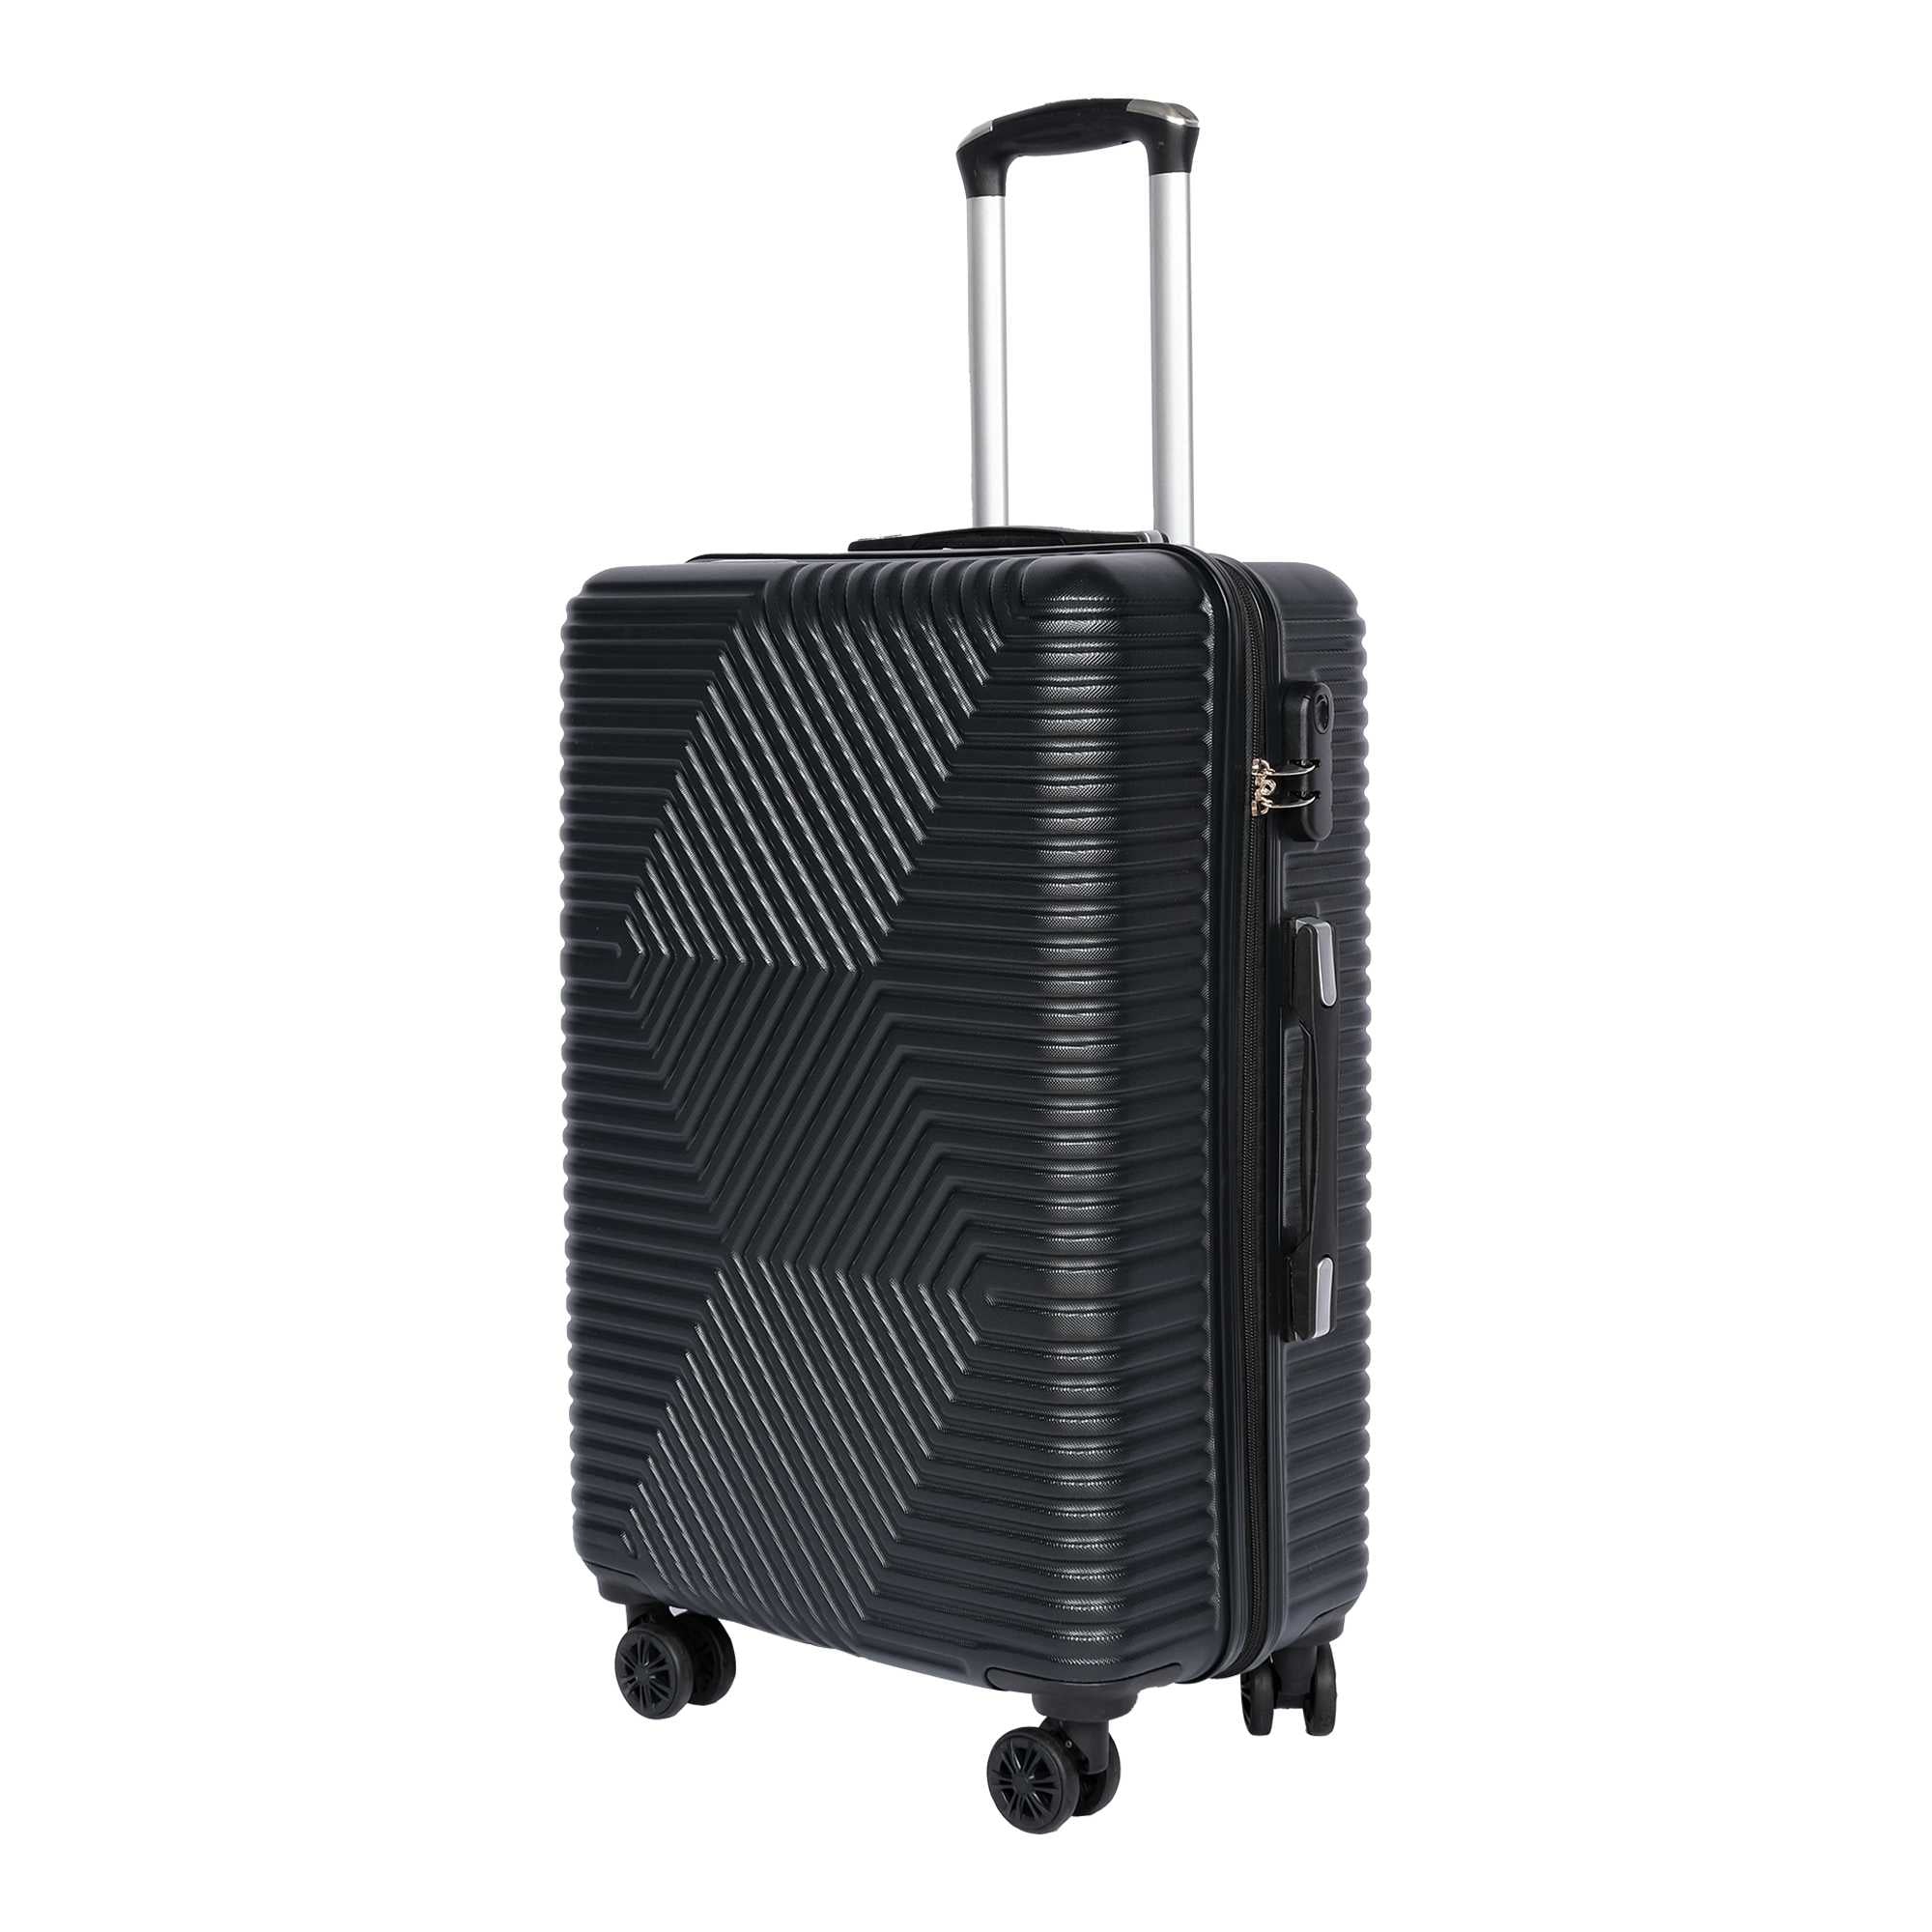 Pigeon ABS Hard-shell Zig Zag Design Trolley - Set of 7 [32, 28, 24, 20, 18, 14, 12inch] Black Color